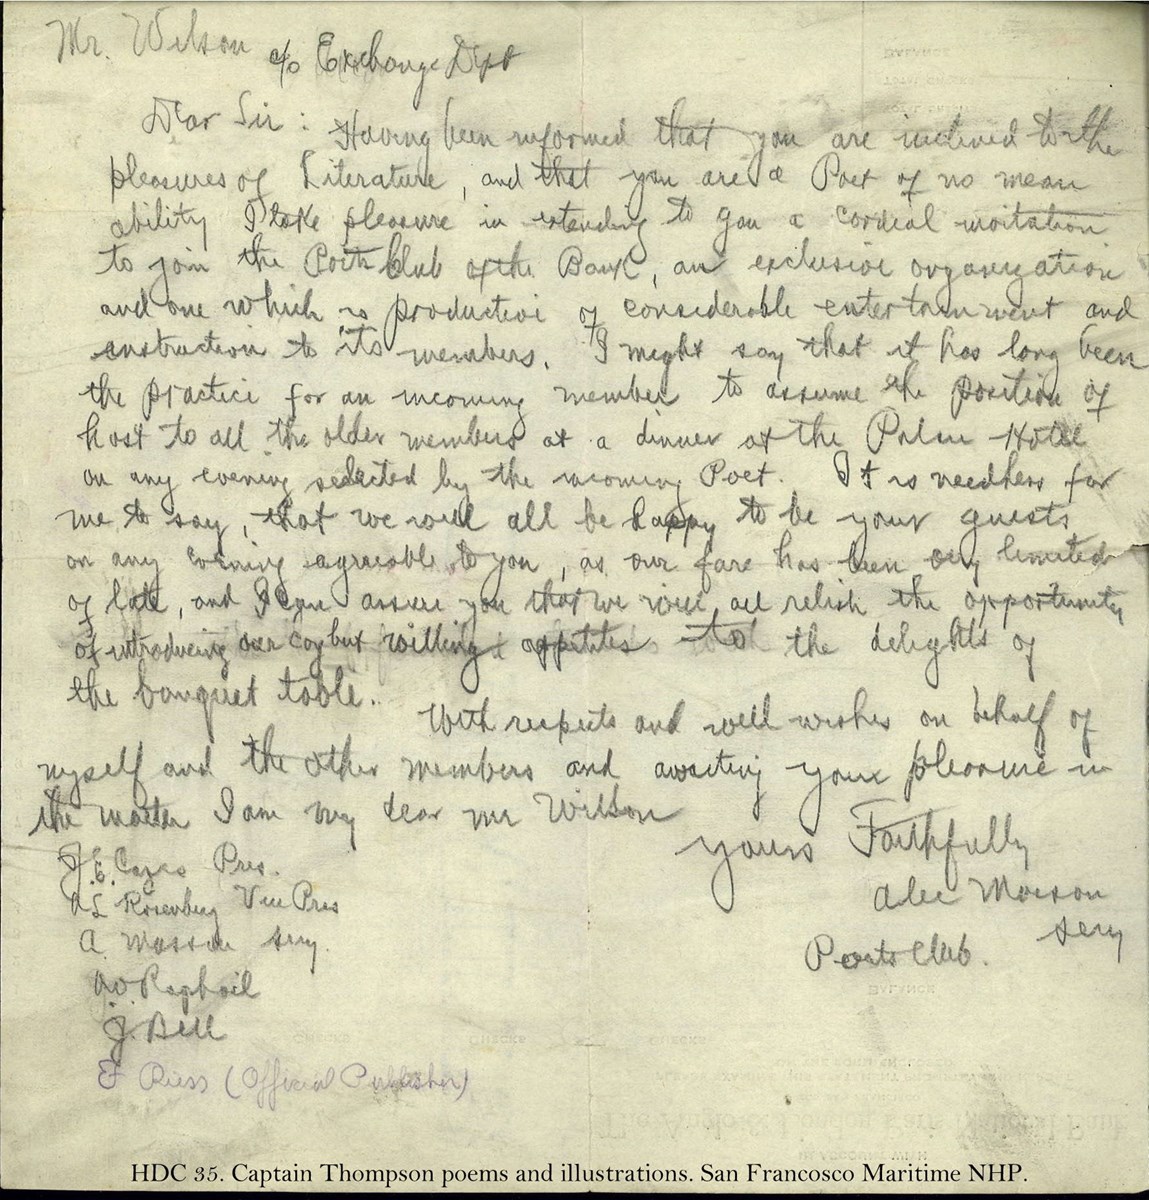 Manuscript letter to Mr. Wilson from the Poet's Club (HDC 35, SAFR 17607)